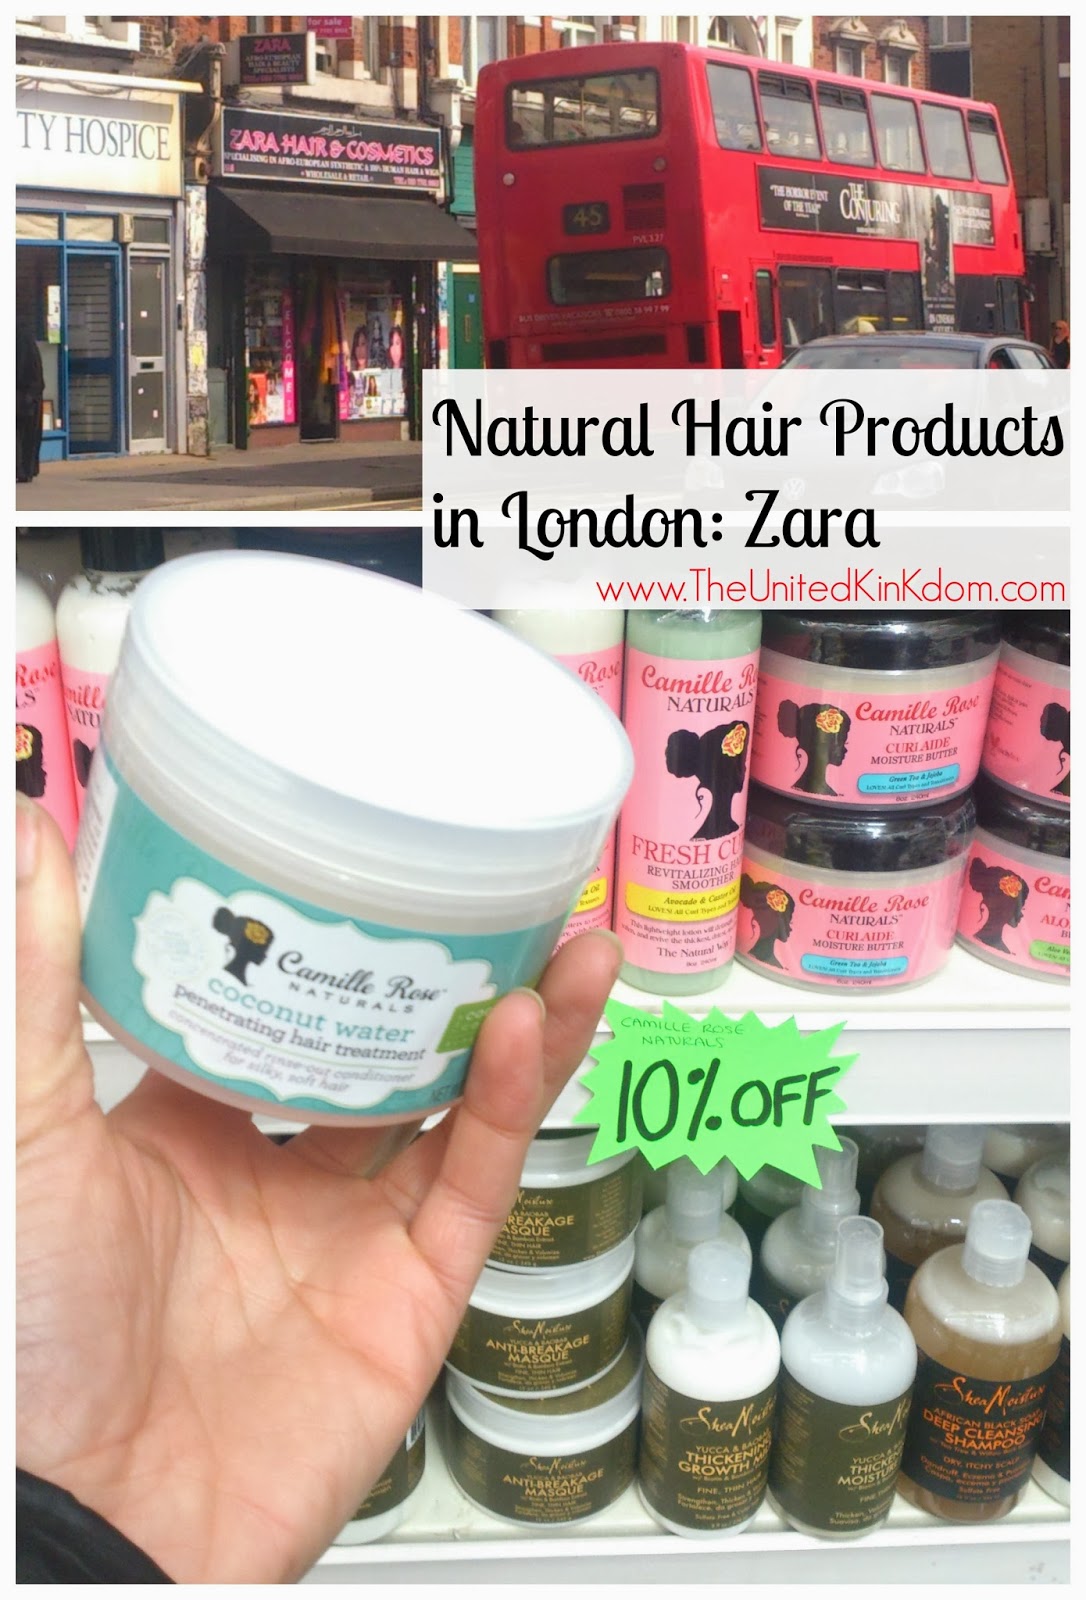 UNITED KinKdom NATURAL HAIR PRODUCTS IN LONDON Zara Hair And